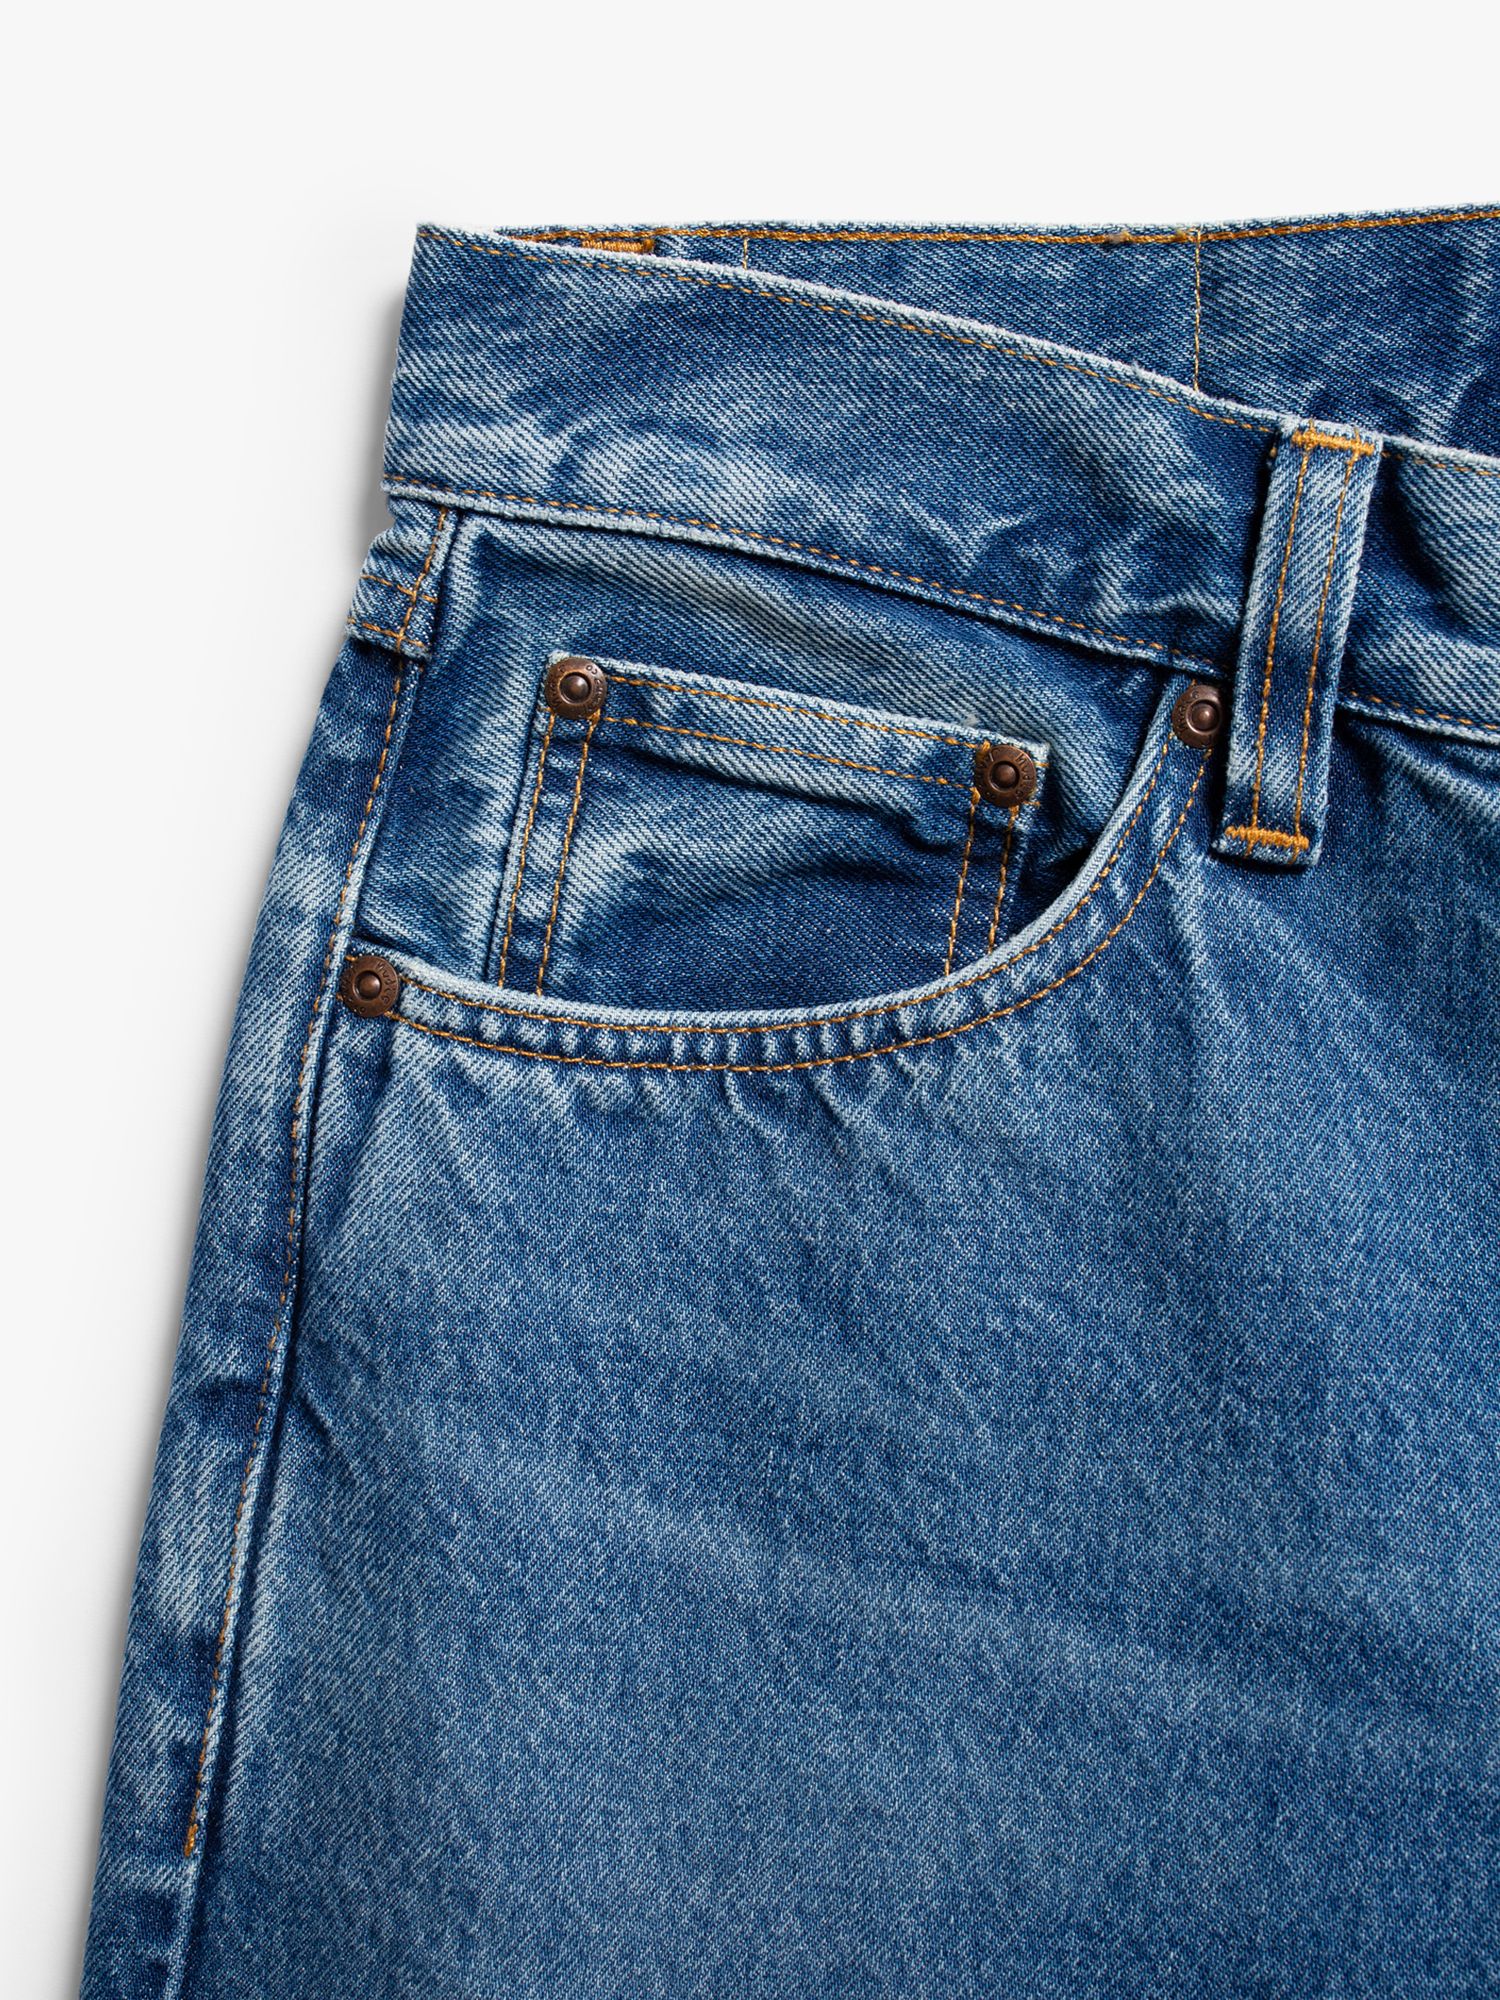 Nudie Jeans Gritty Jackson Regular Fit Jeans, Blue at John Lewis & Partners